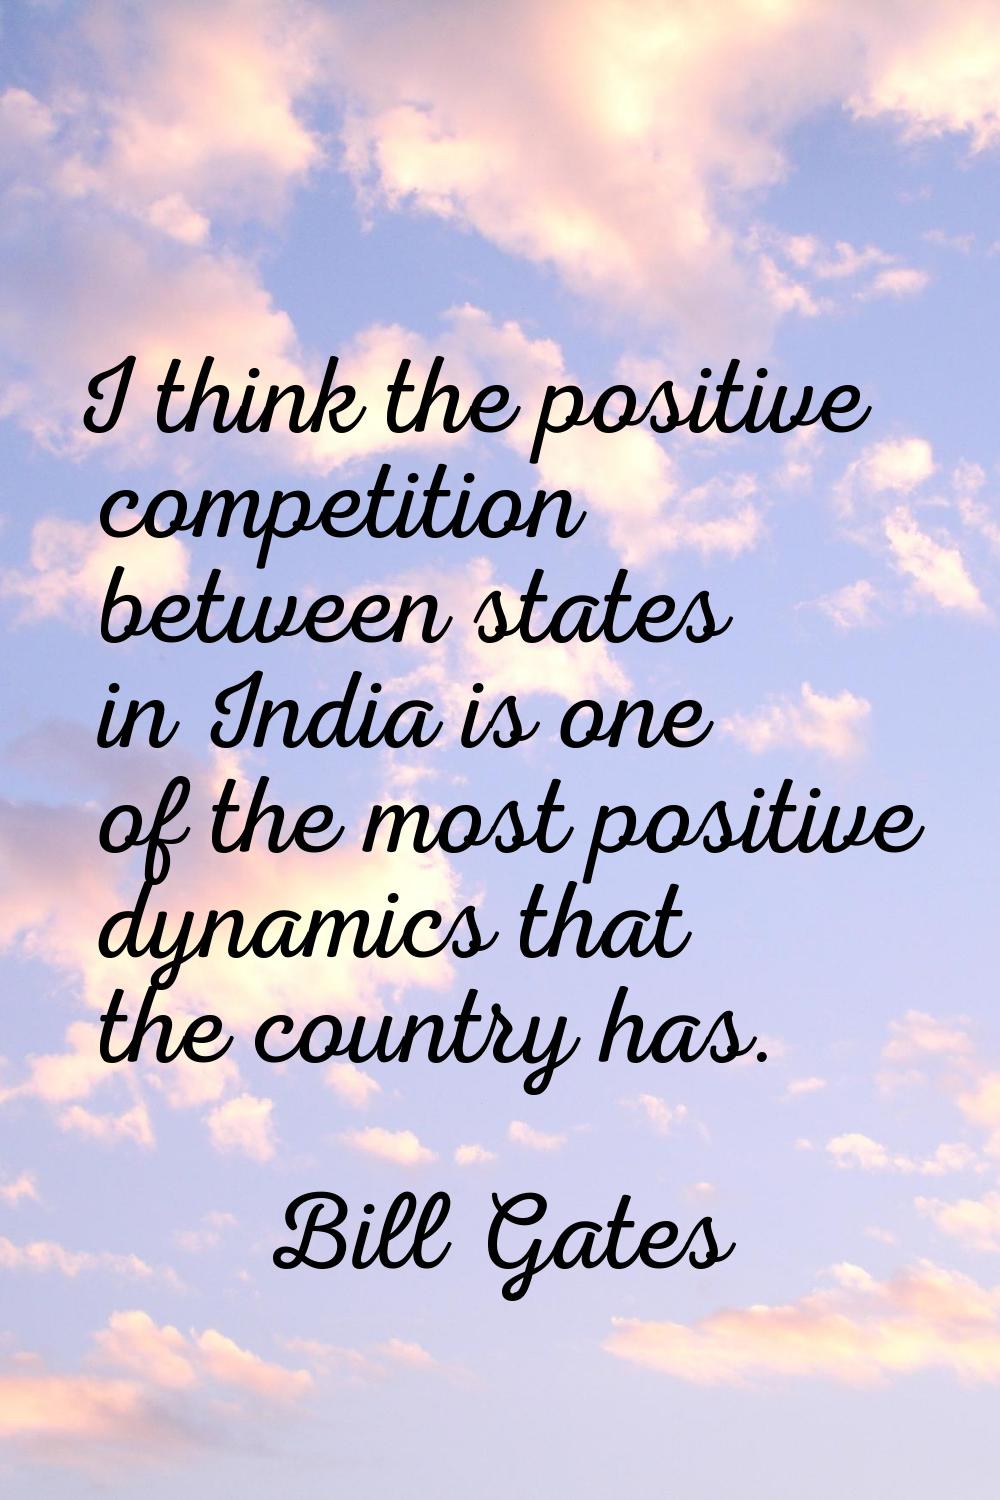 I think the positive competition between states in India is one of the most positive dynamics that 